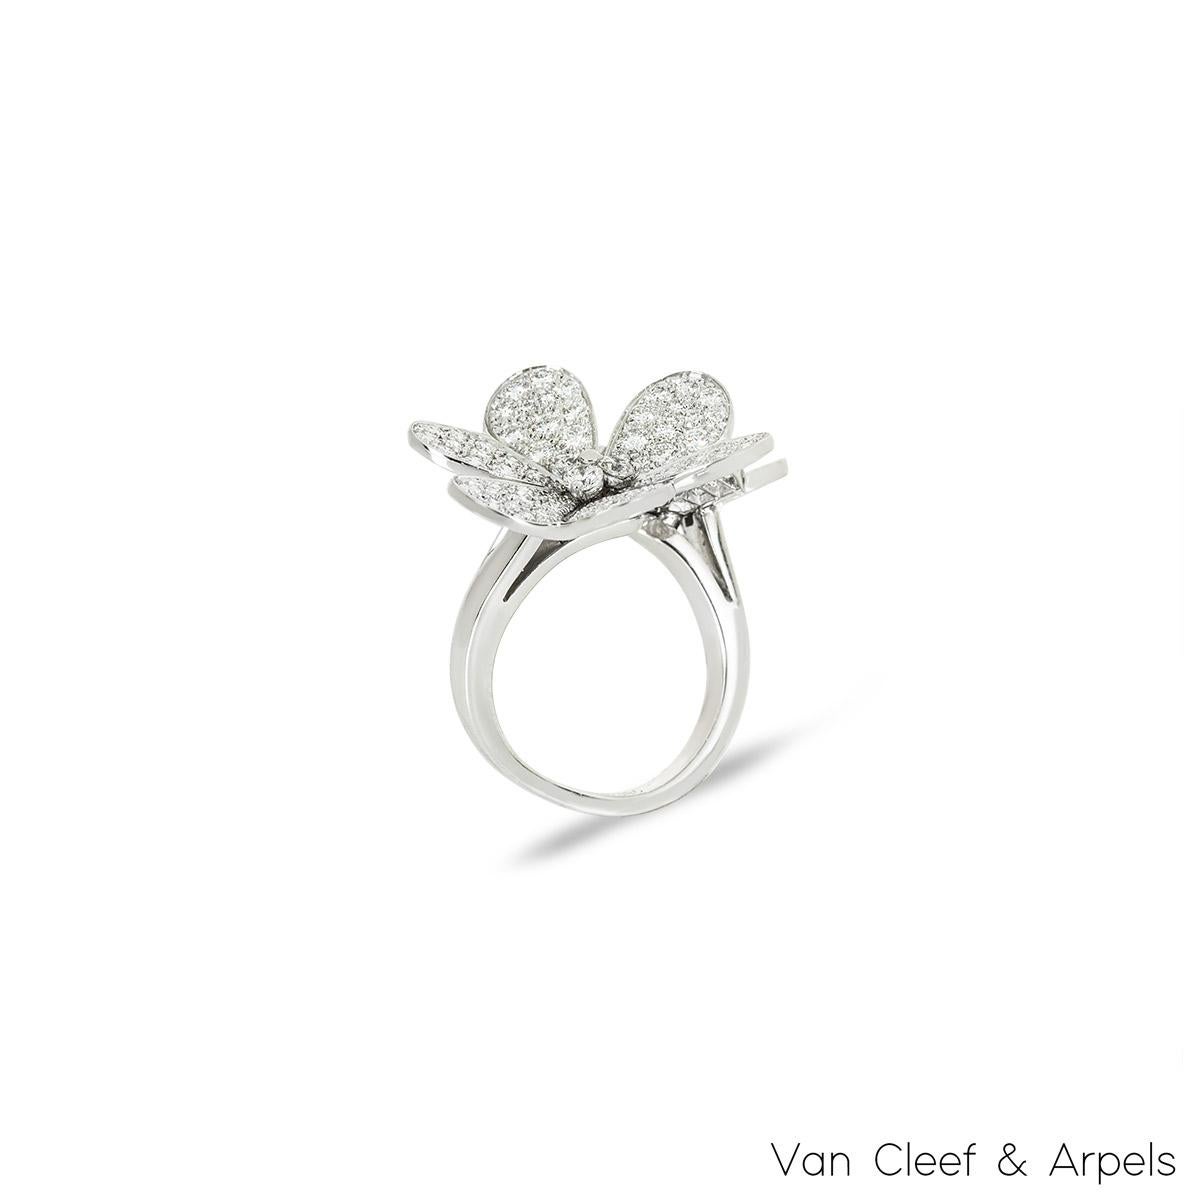 A stunning 18k white gold diamond ring by Van Cleef & Arpels from the Frivole collection. The ring comprises of 2 diamond set floral motifs varying in size. The 130 round brilliant cut diamonds have an approximate total weight of 2.40ct, D-F colour